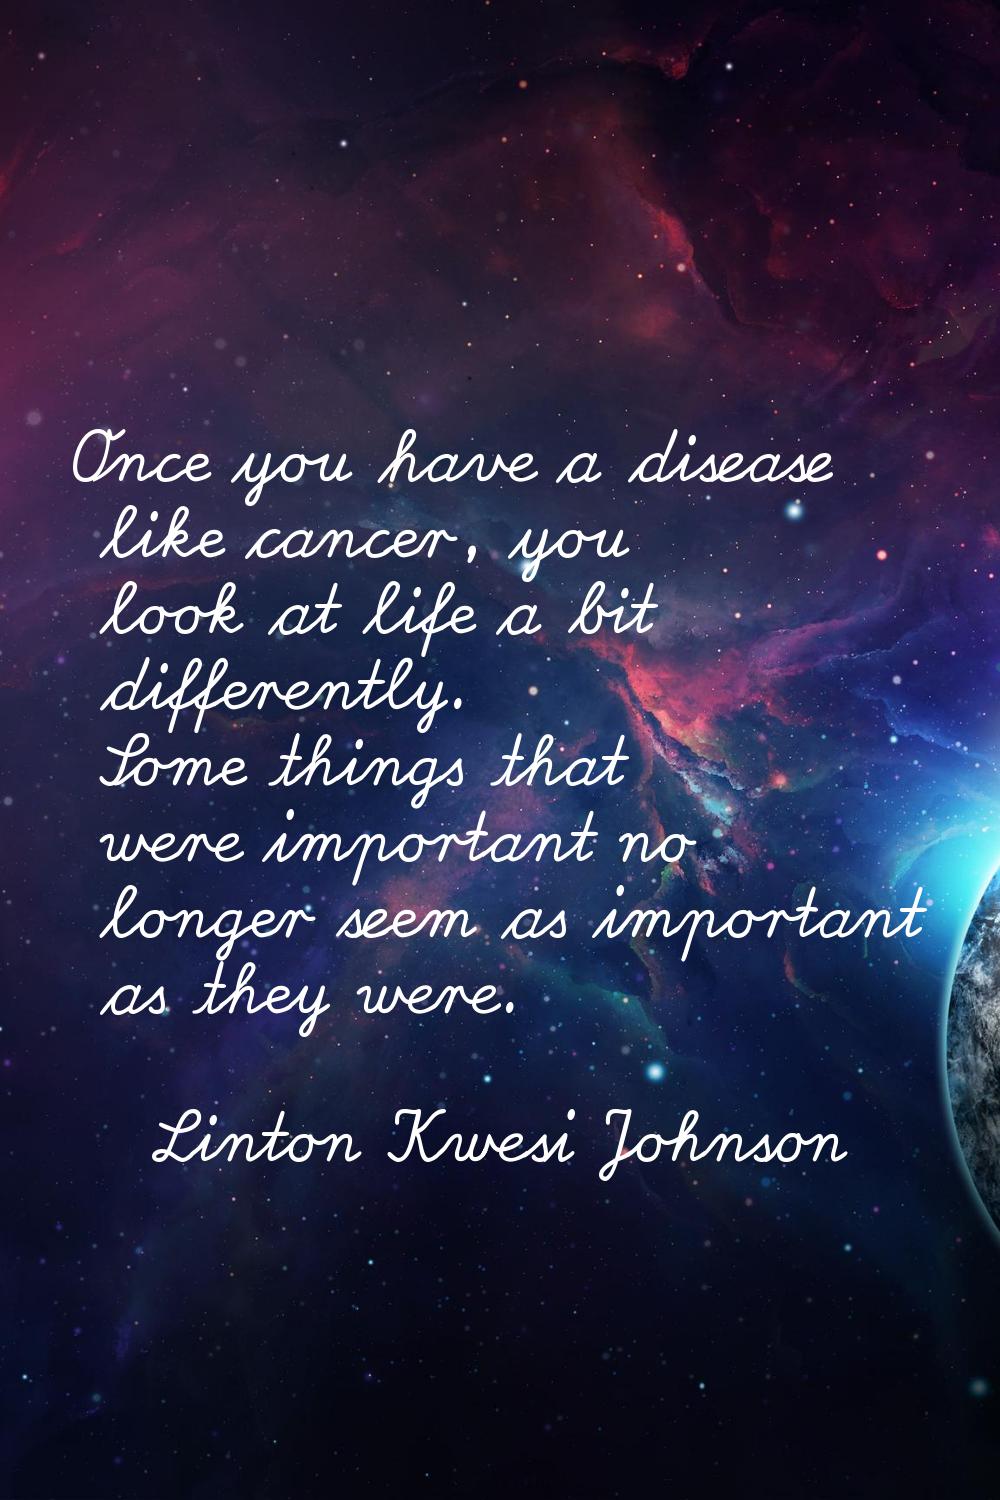 Once you have a disease like cancer, you look at life a bit differently. Some things that were impo